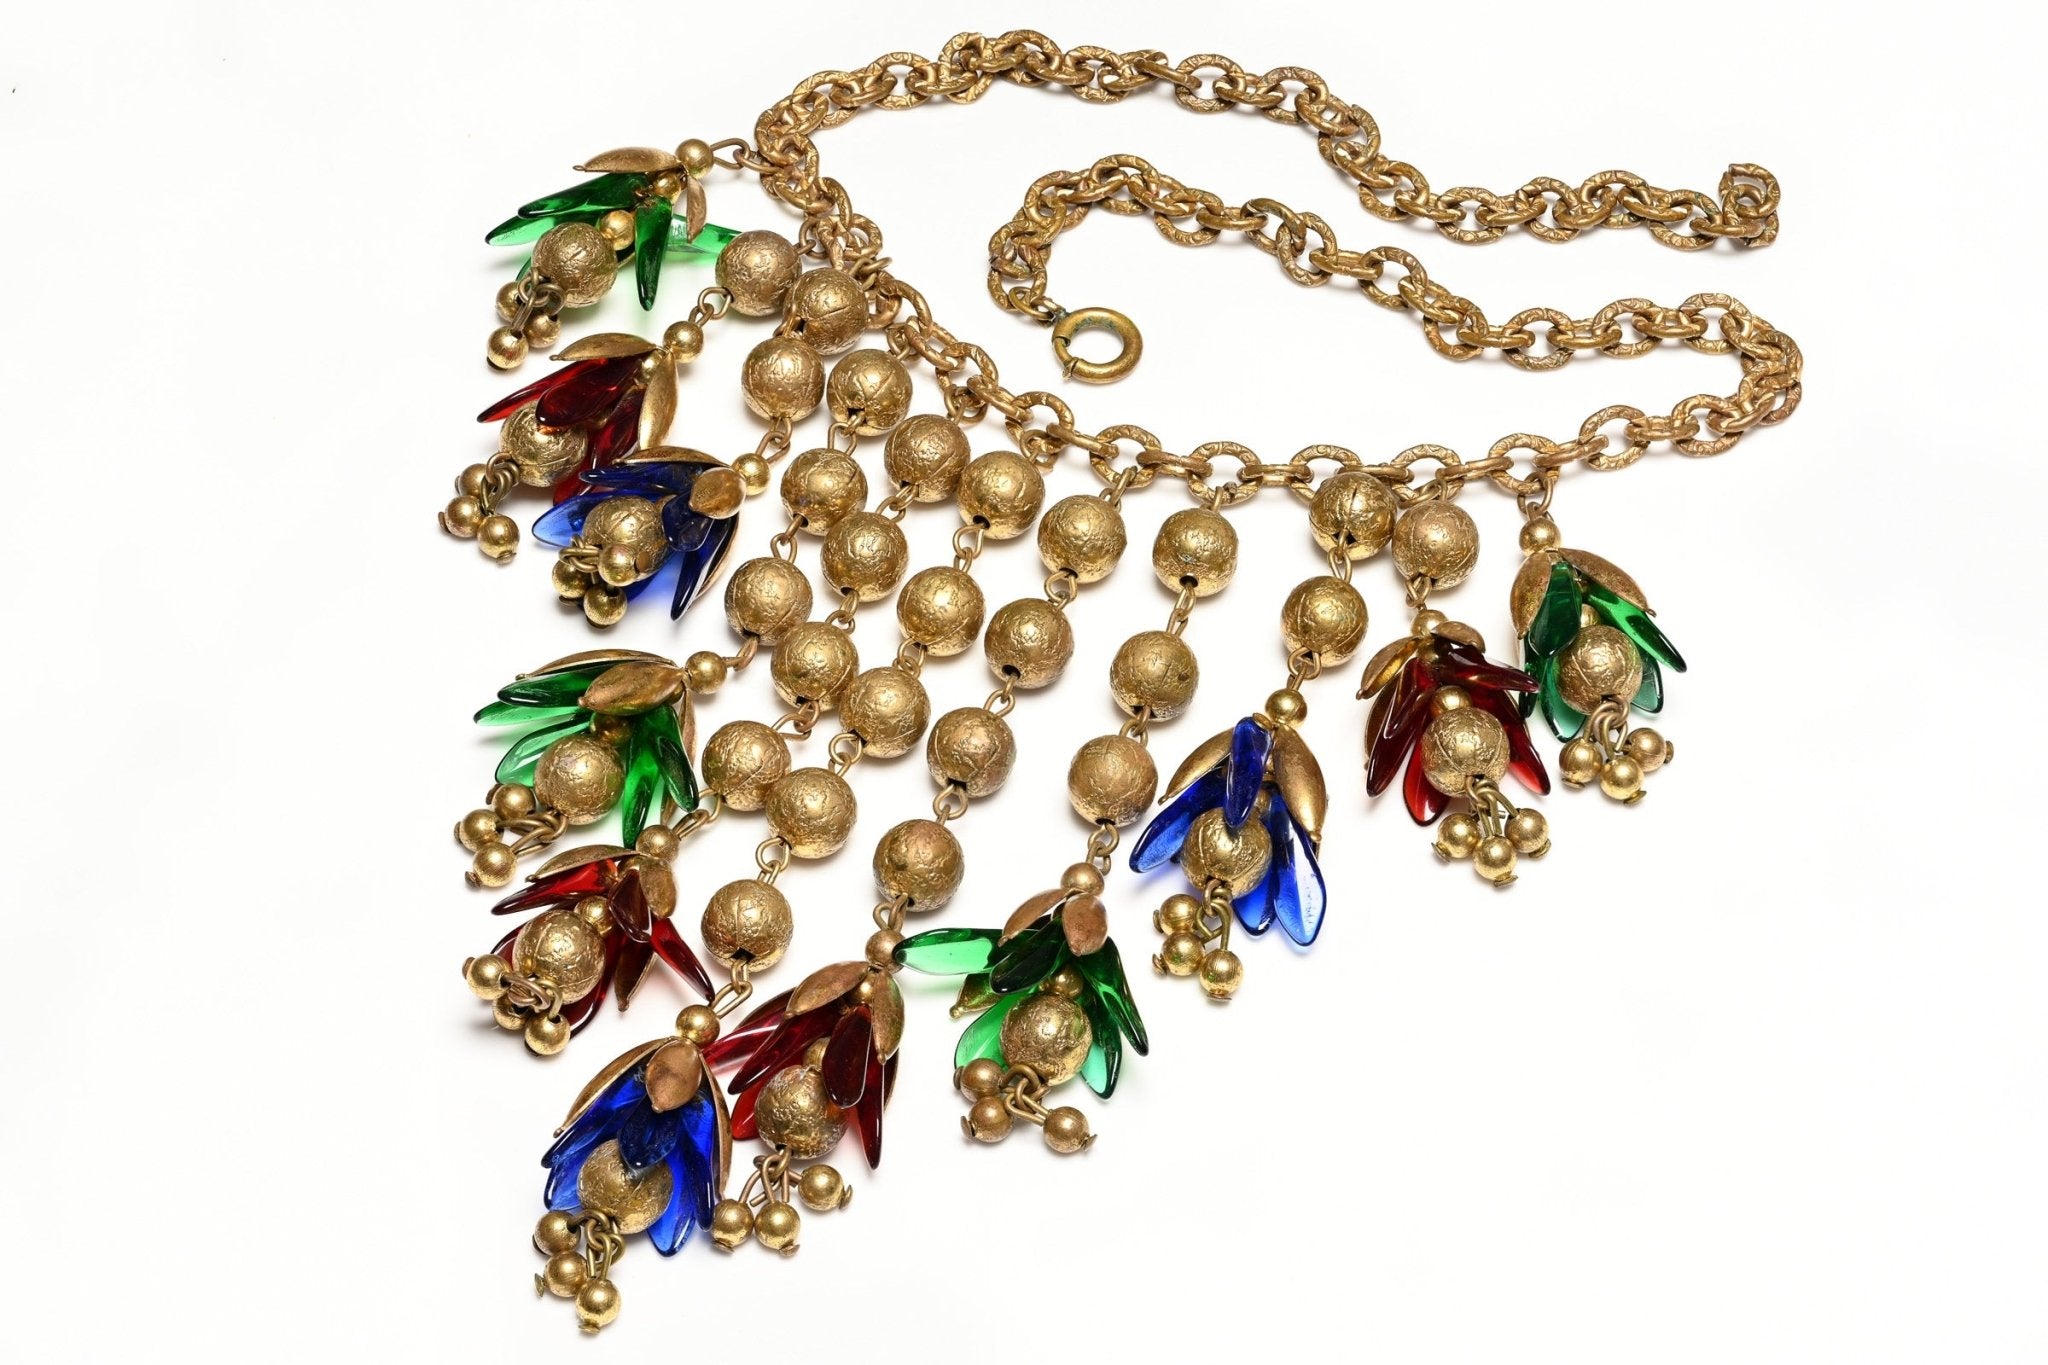 Vintage 1930's Miriam Haskell Green Red Blue Glass Flower Metal Beads Tassel Necklace